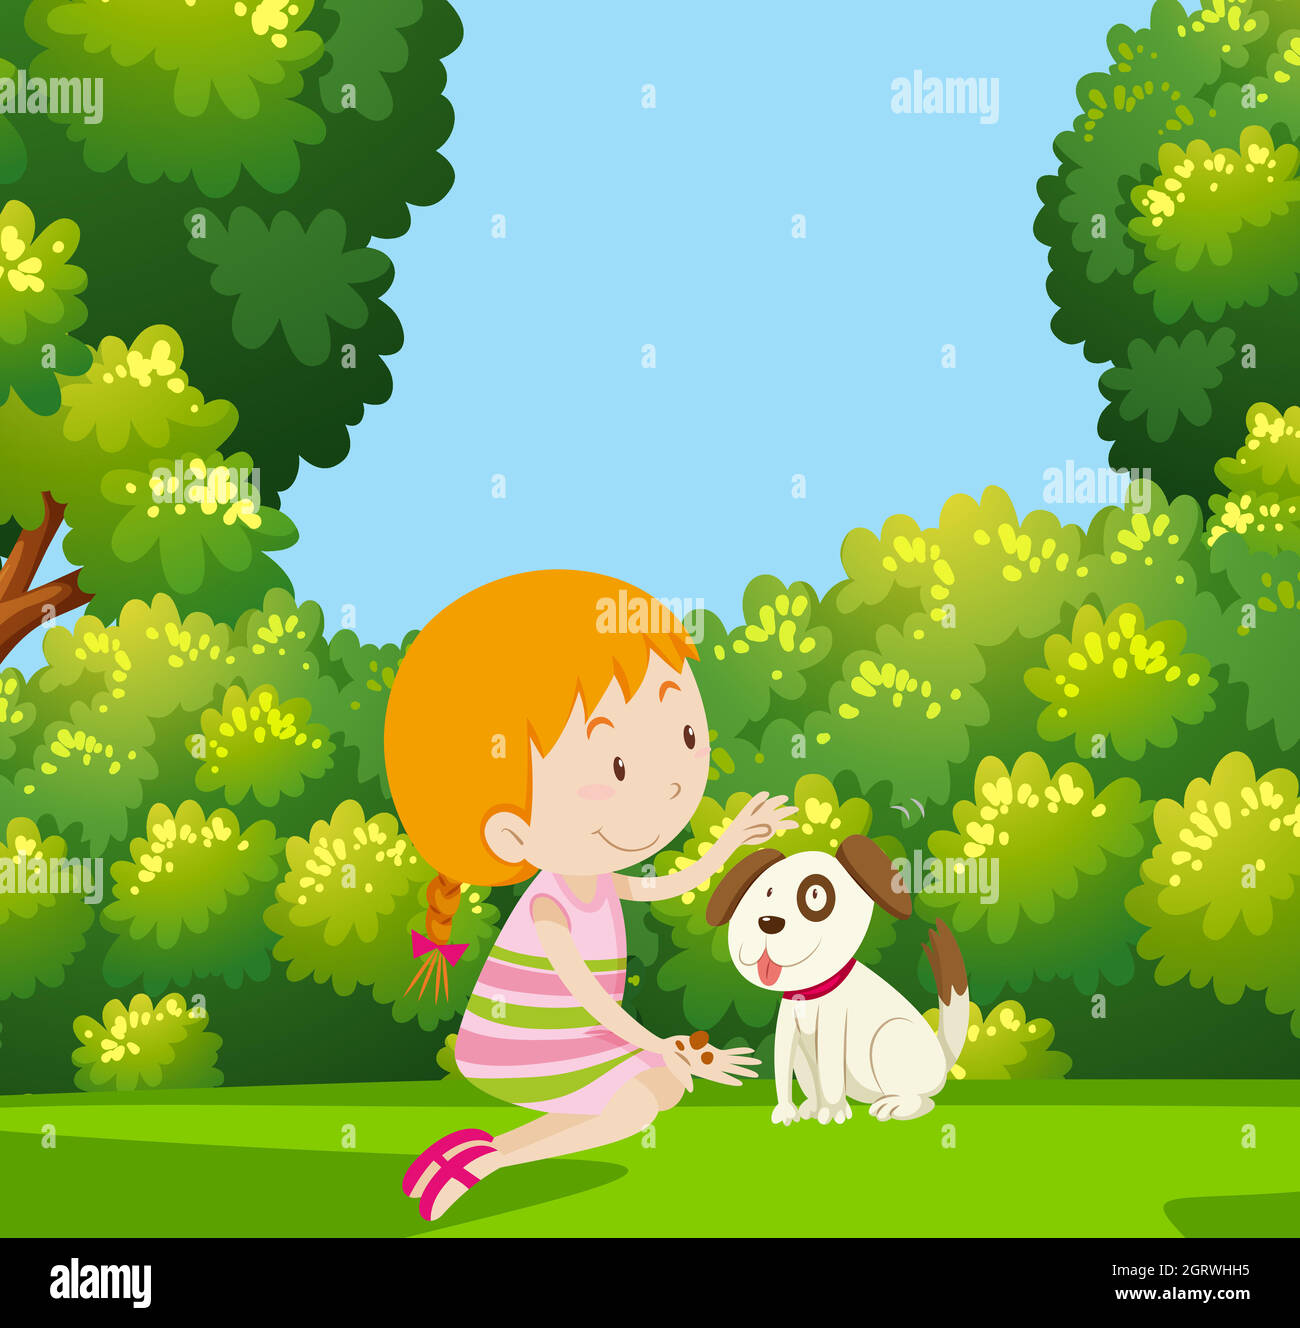 Girl Playing with Dog in Garden Stock Vector